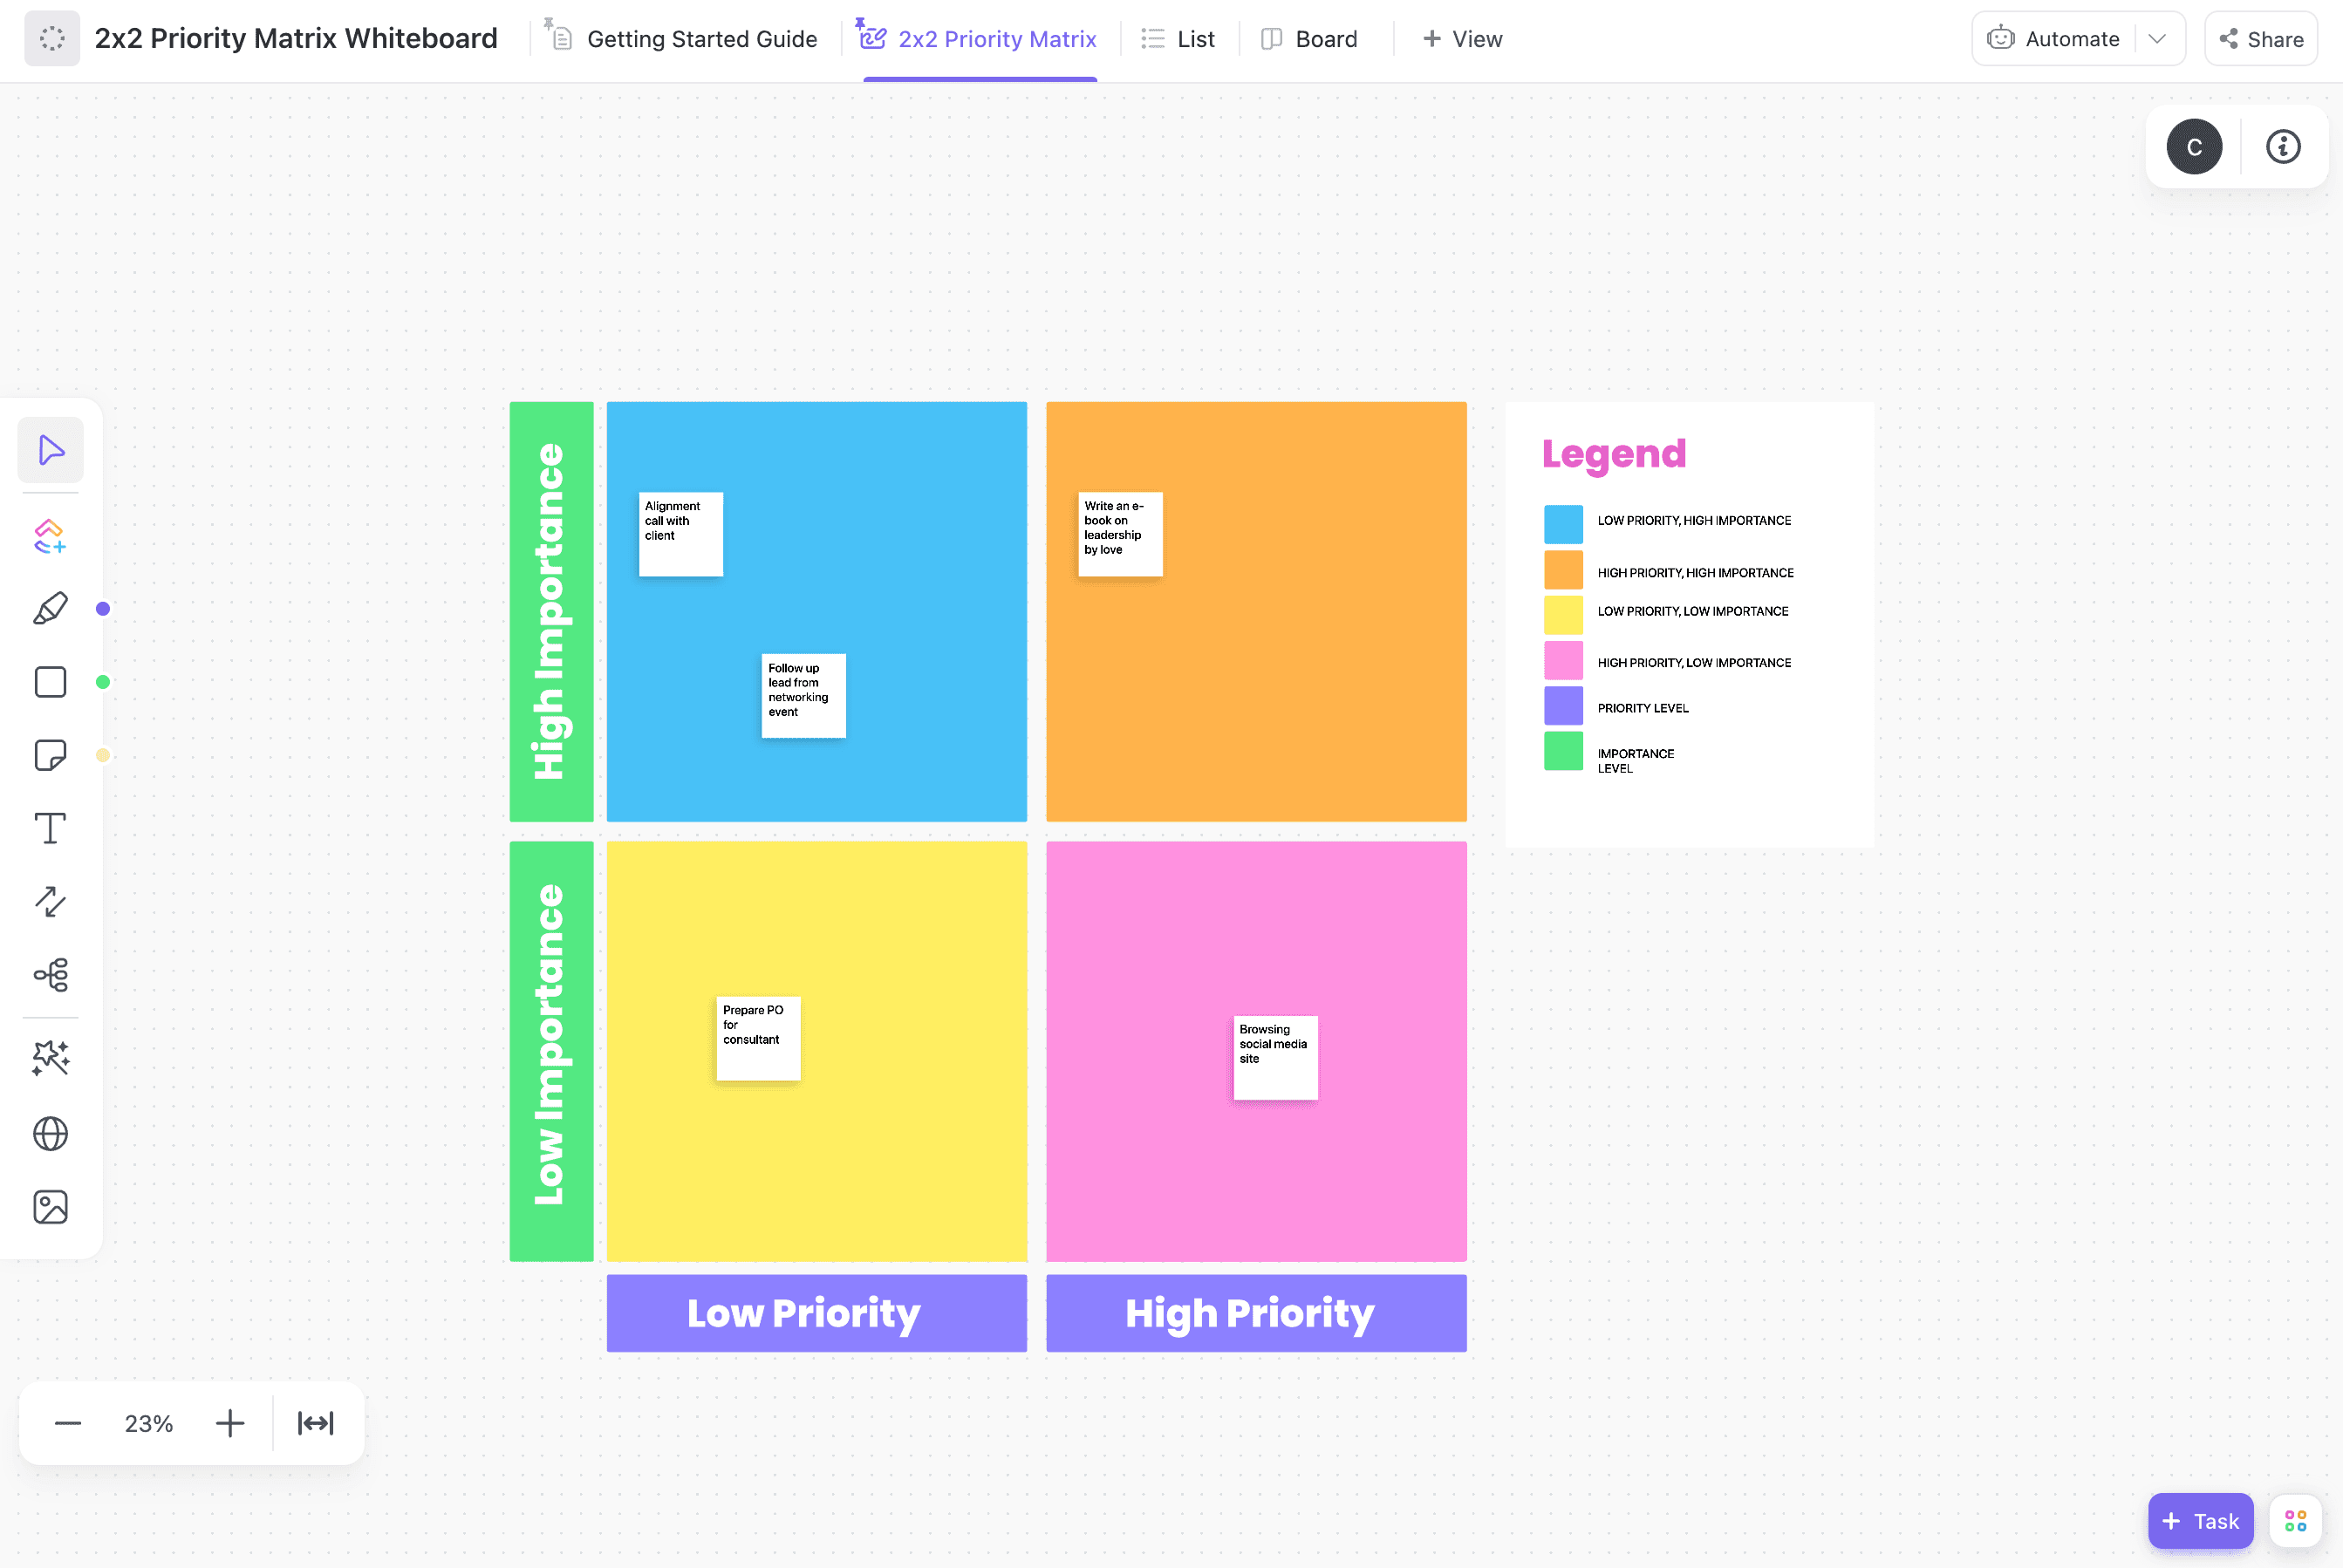 ClickUp provides a basic 2x2 Priority Matrix Whiteboard to help you organize your tasks according to their importance and priority level. This will assist your team or company allocate resources for the important ones.